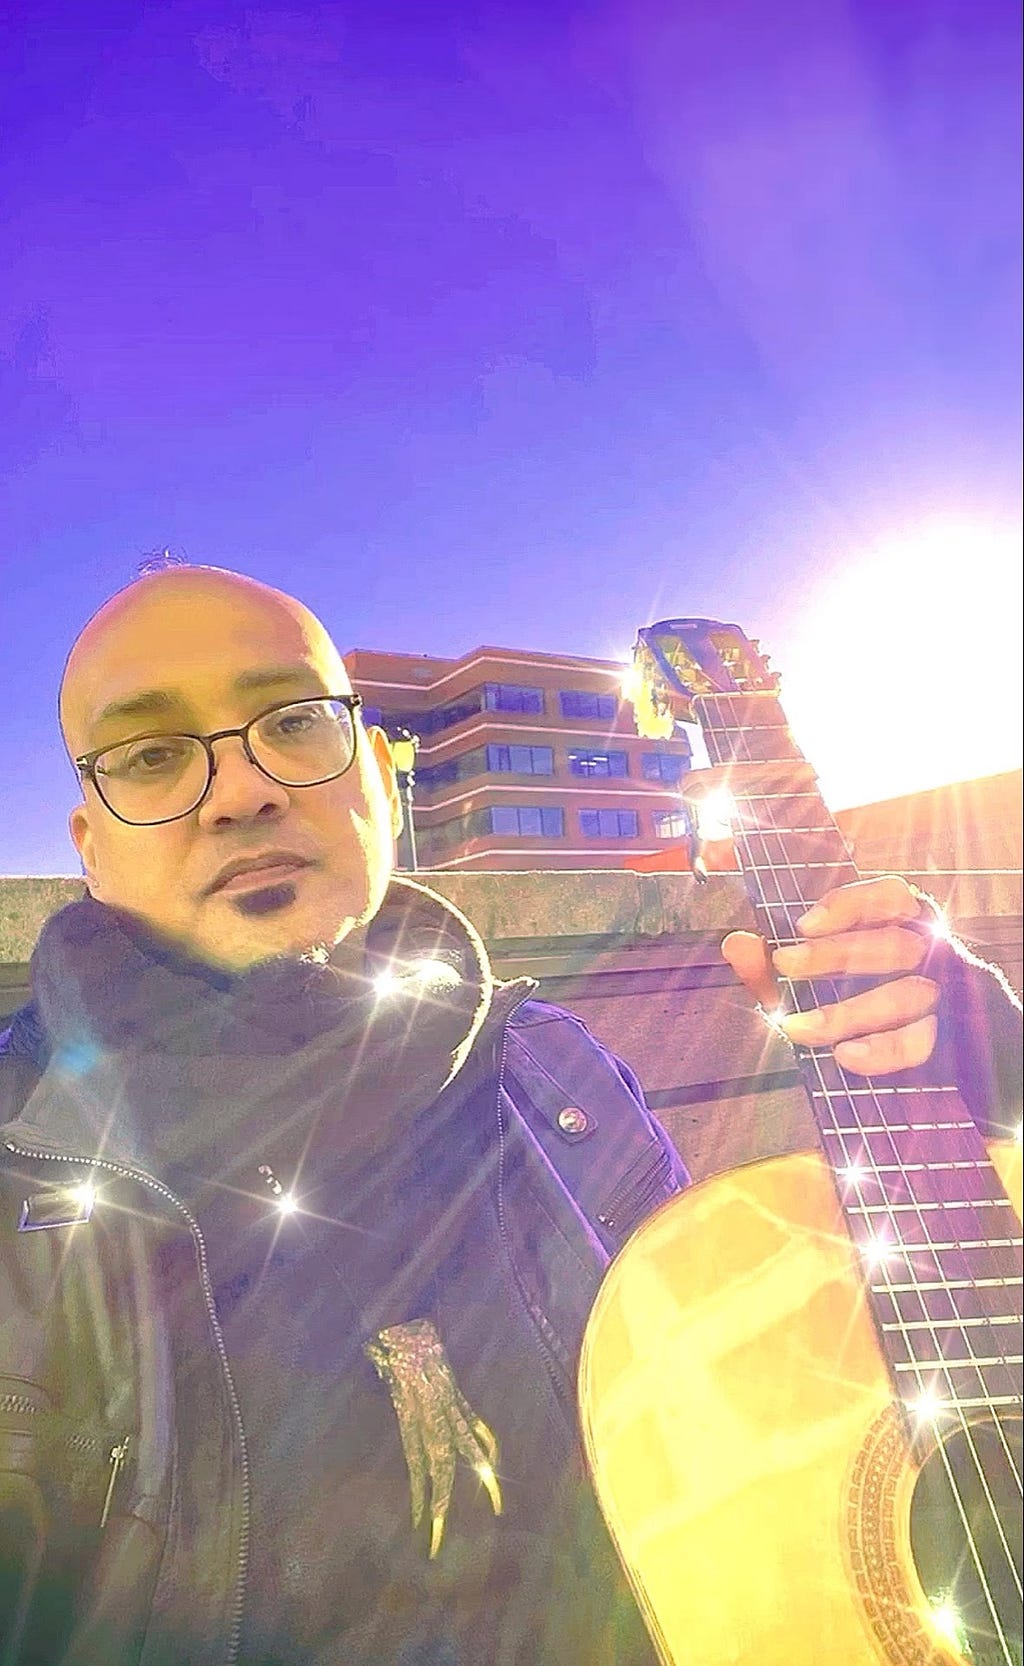 An image of the author, with a shaved head and glasses, holding a guitar in the air outdoors as the sun shines down from behind over the top of the buildings dotting the cityscape.